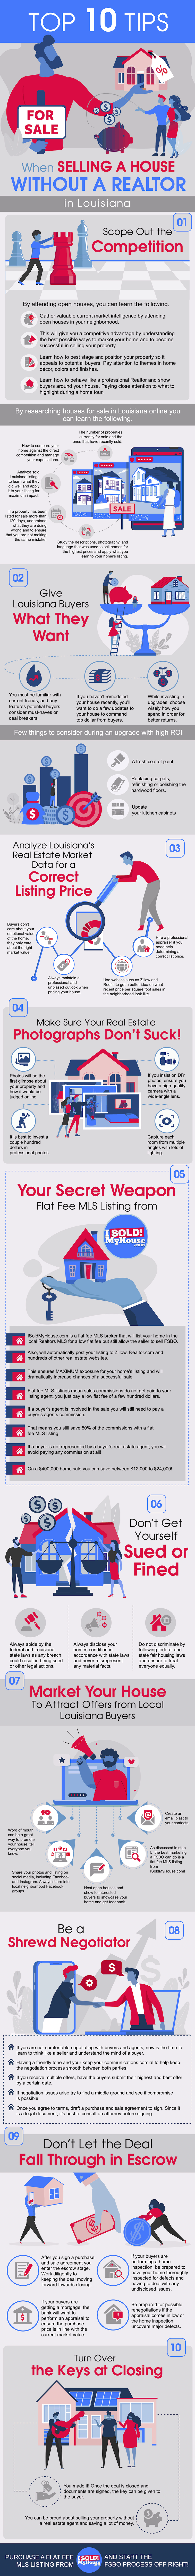 infographic of the 10 steps to sell a house in louisiana without an agent